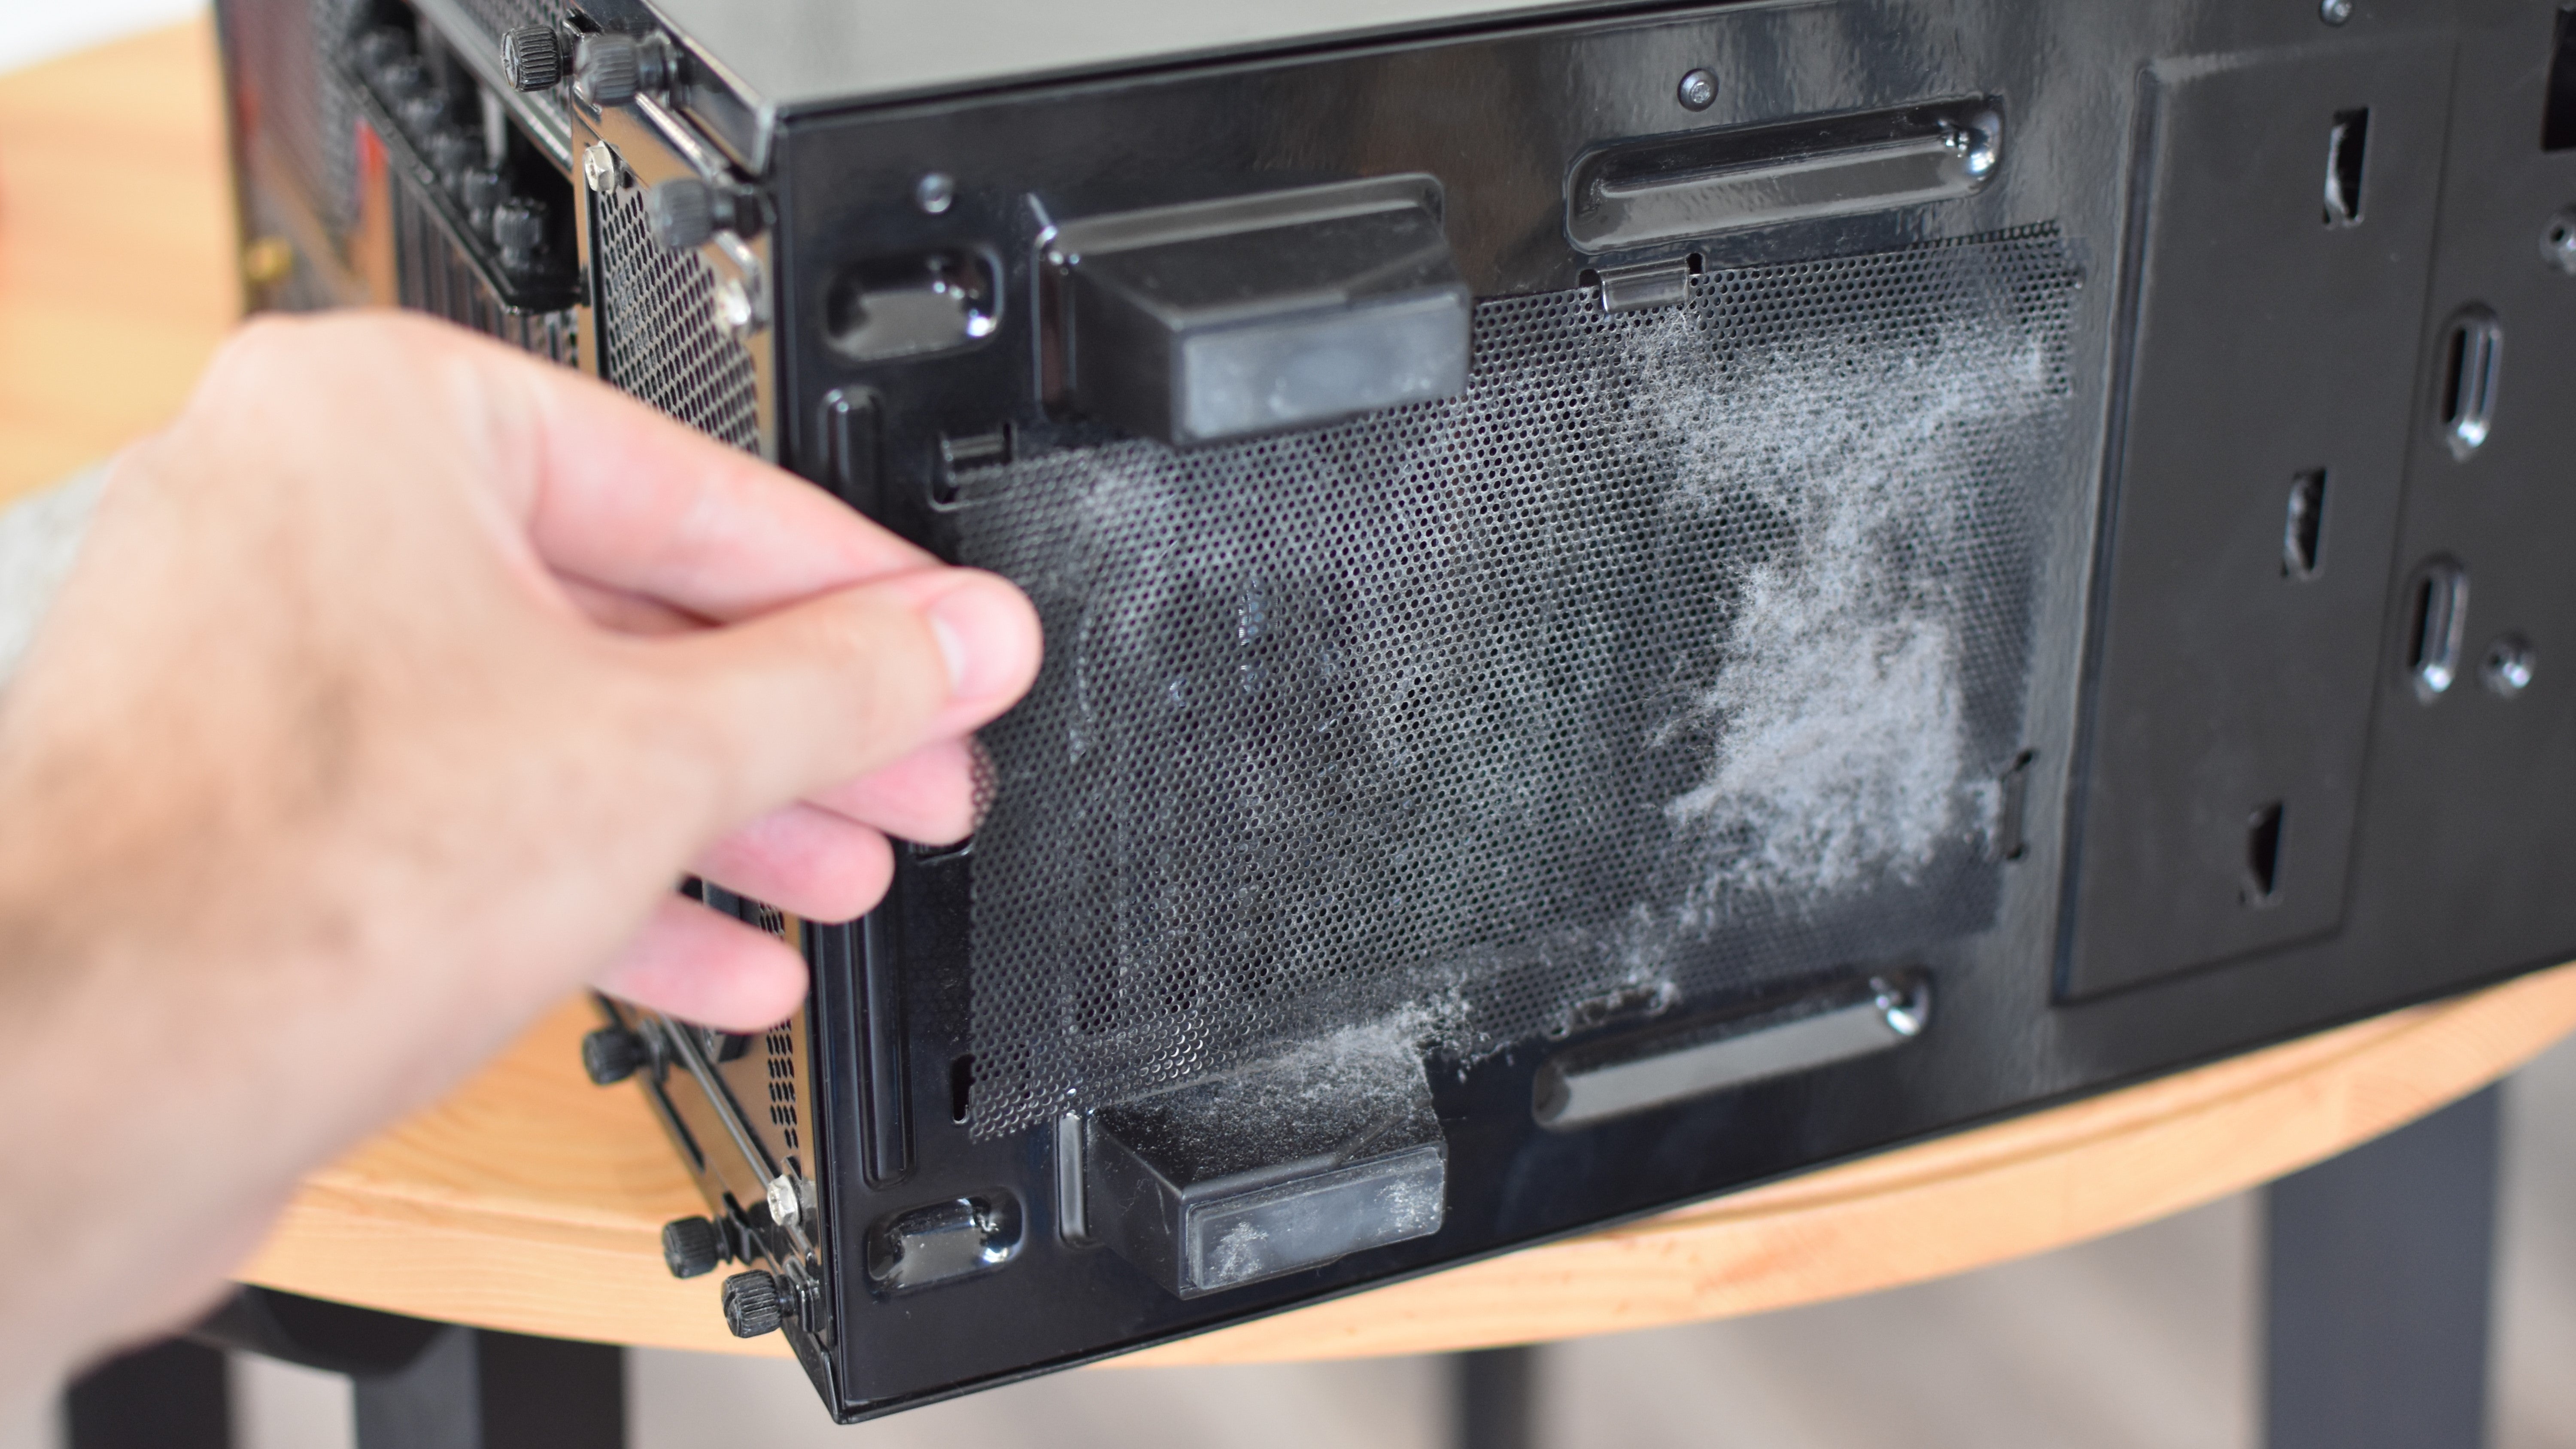 An image of a dirty PC case dust filter.